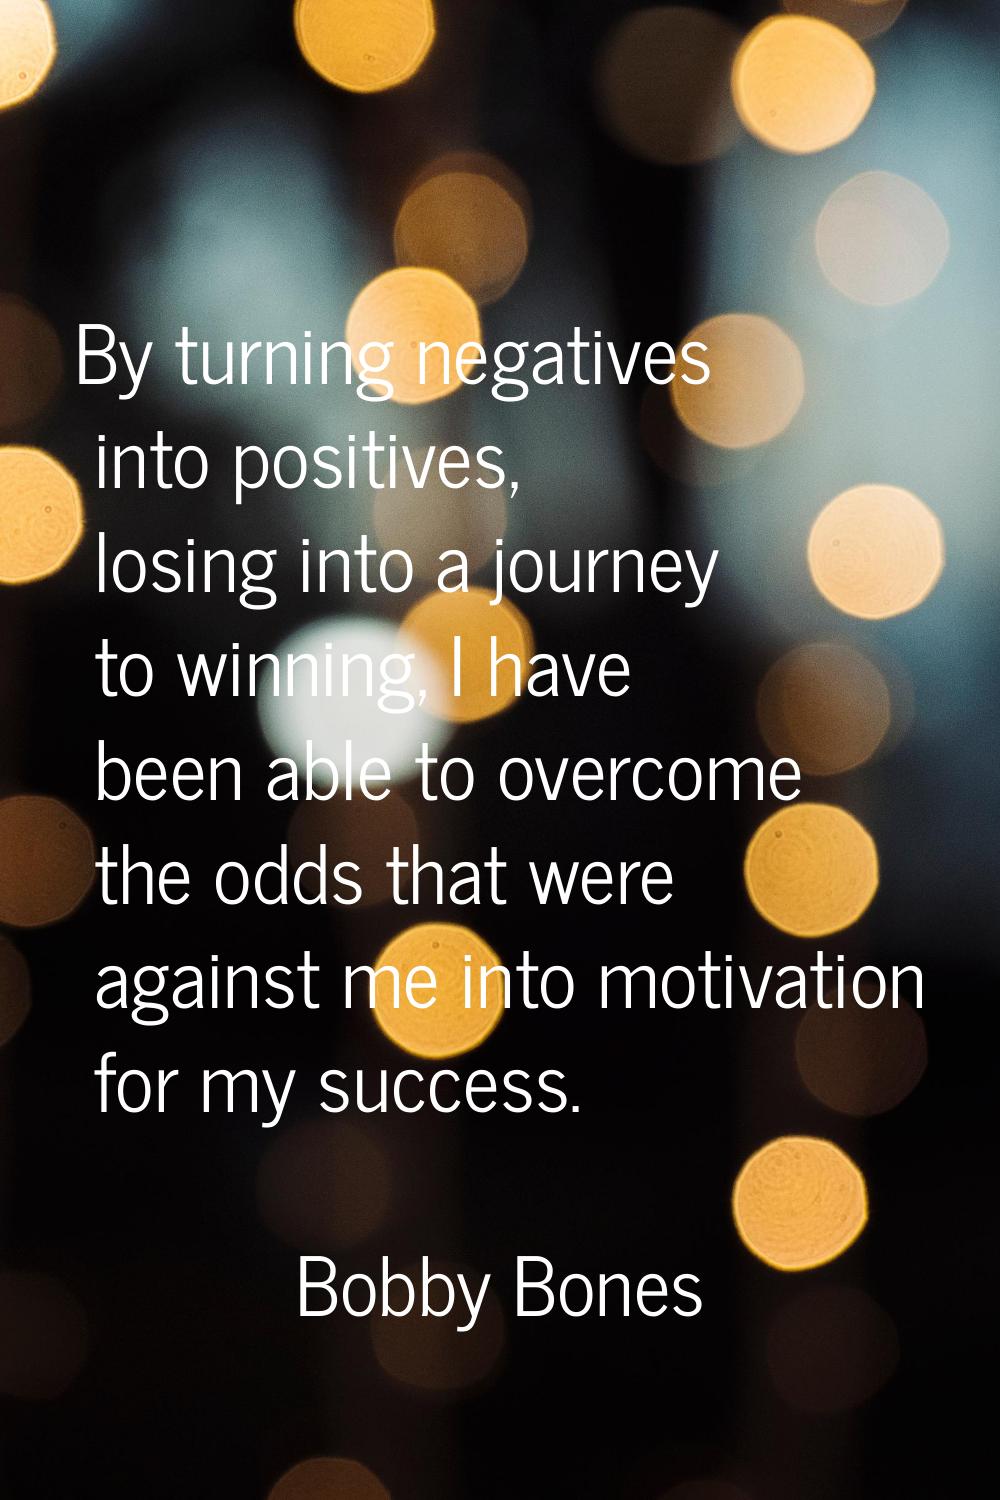 By turning negatives into positives, losing into a journey to winning, I have been able to overcome